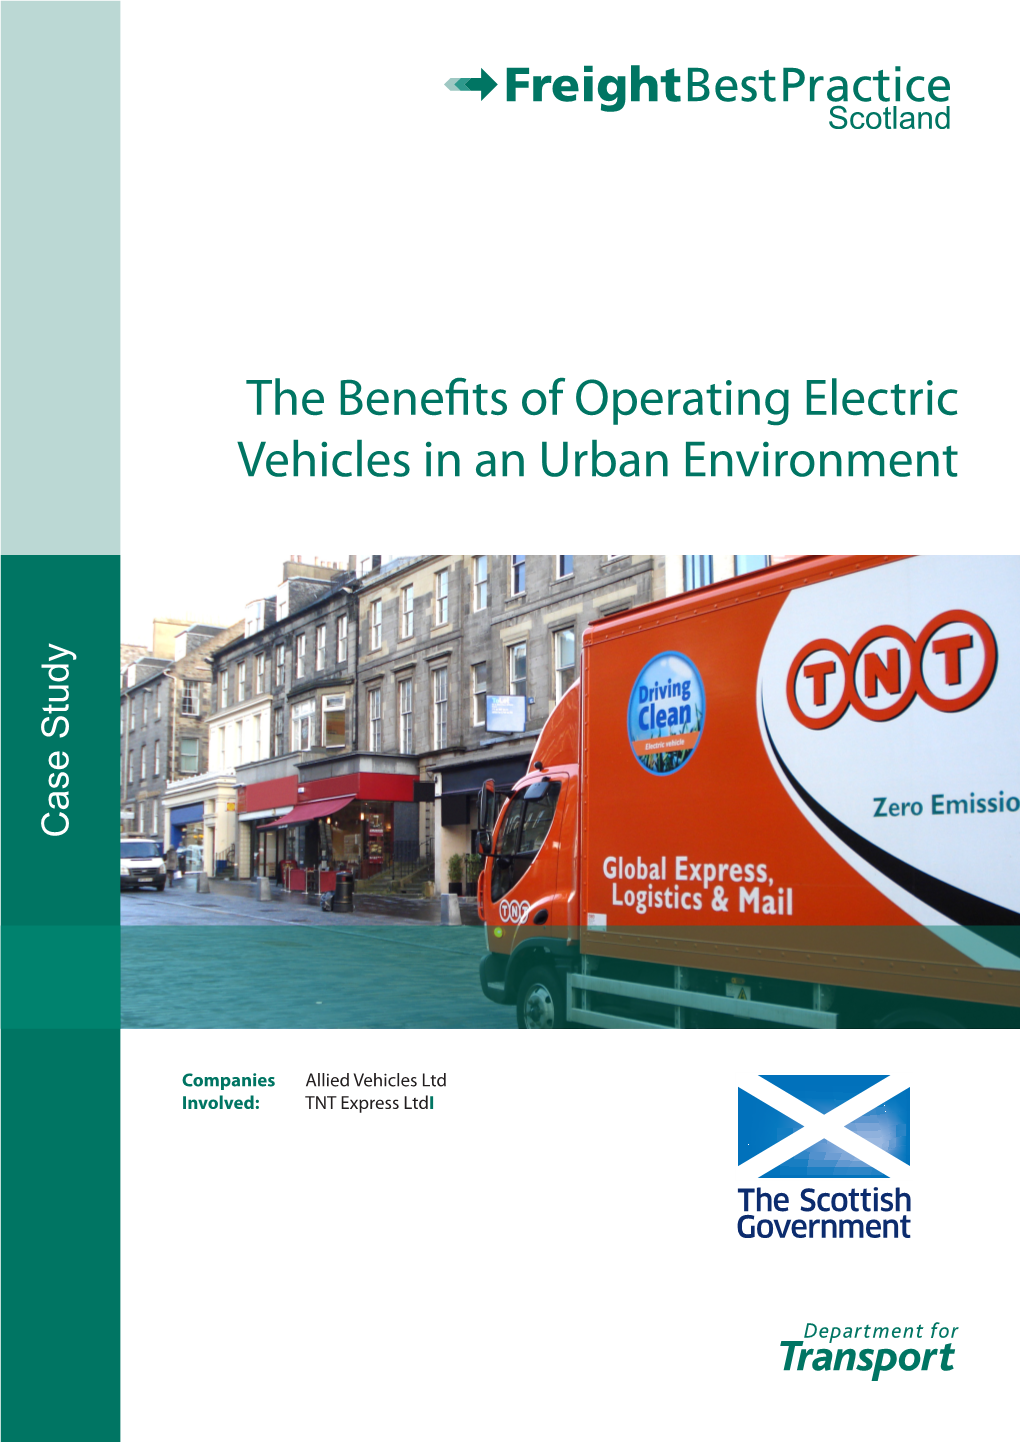 The Benefits of Operating Electric Vehicles in an Urban Environment Case Study